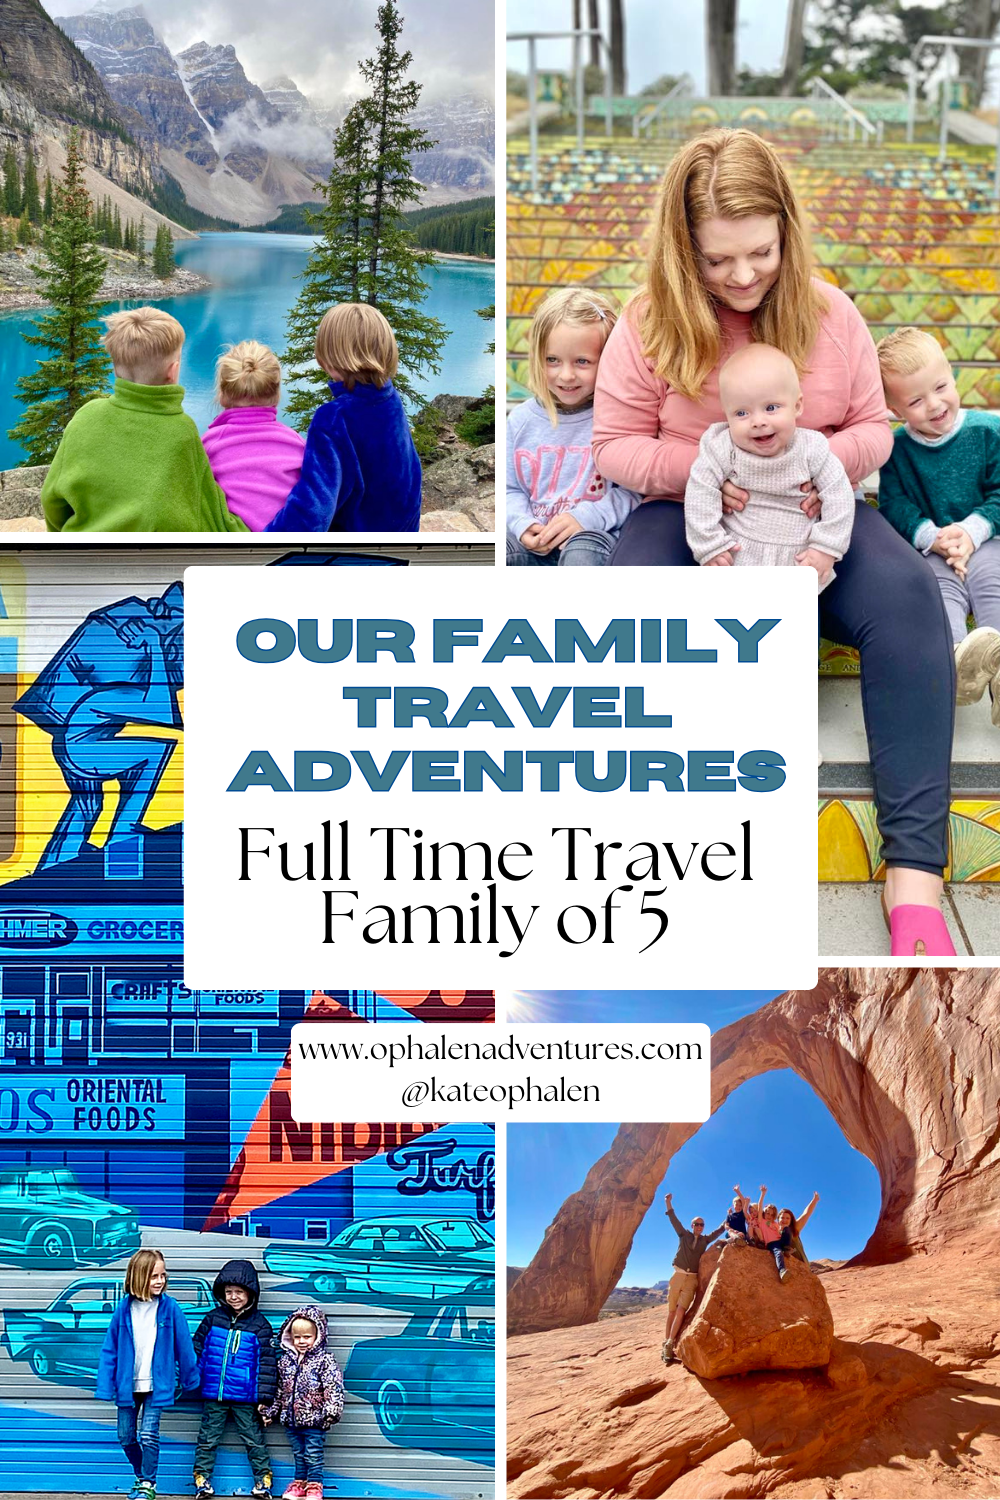 Our Family Travel Adventures: Full Time Travel Family of 5!